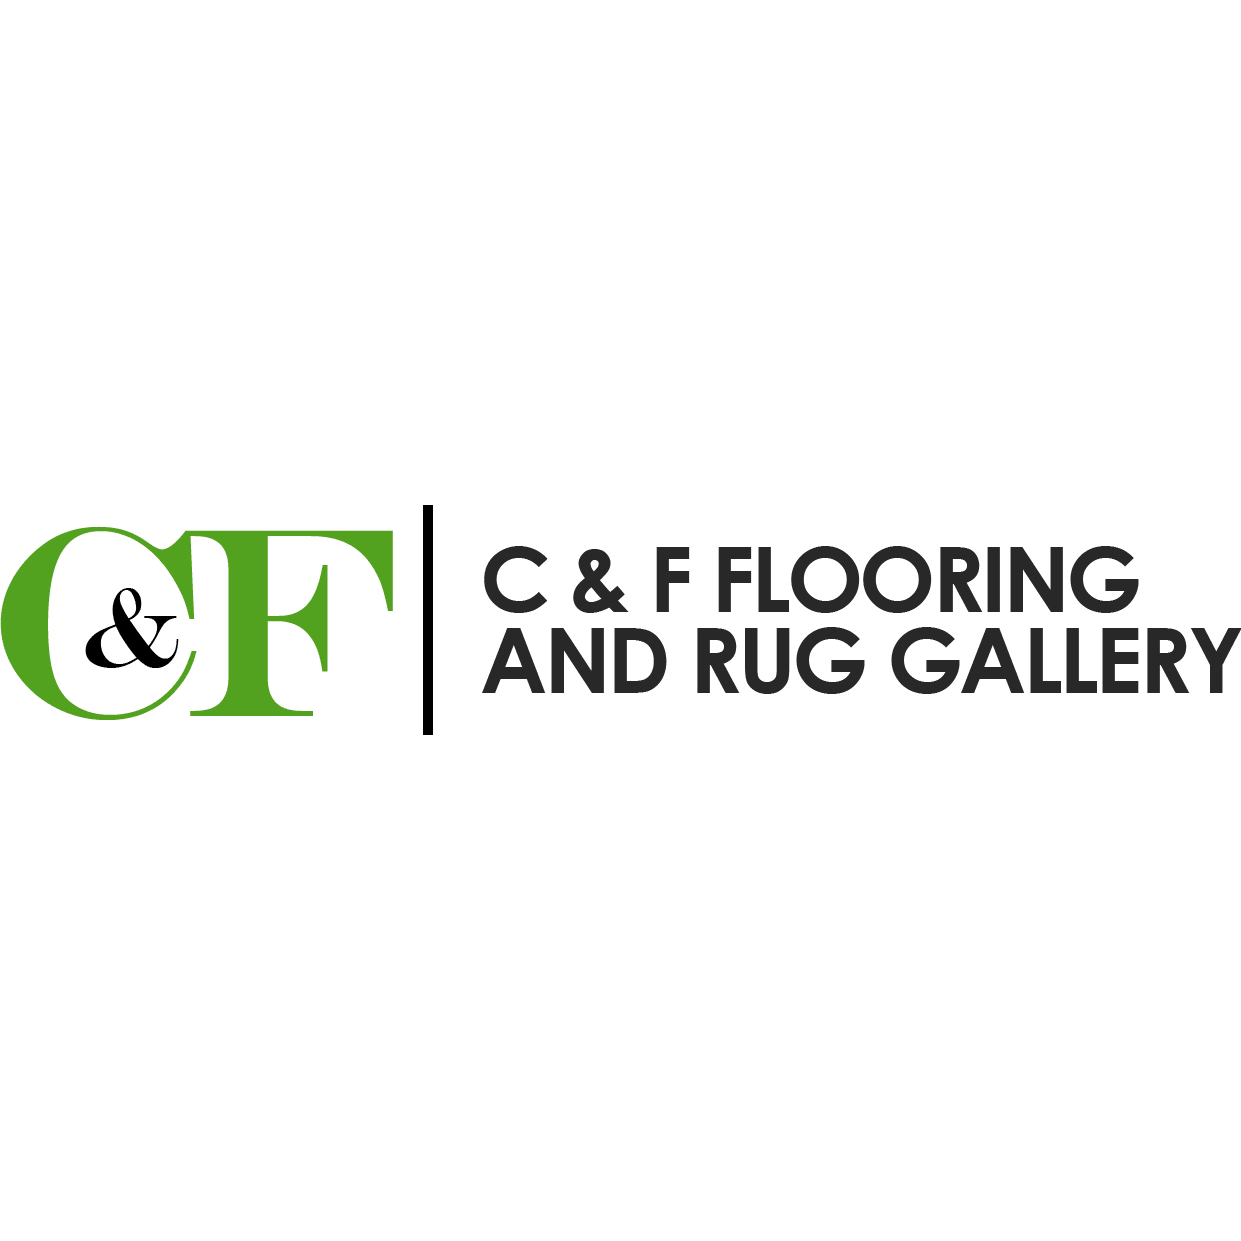 C & F Flooring and Rug Gallery Photo